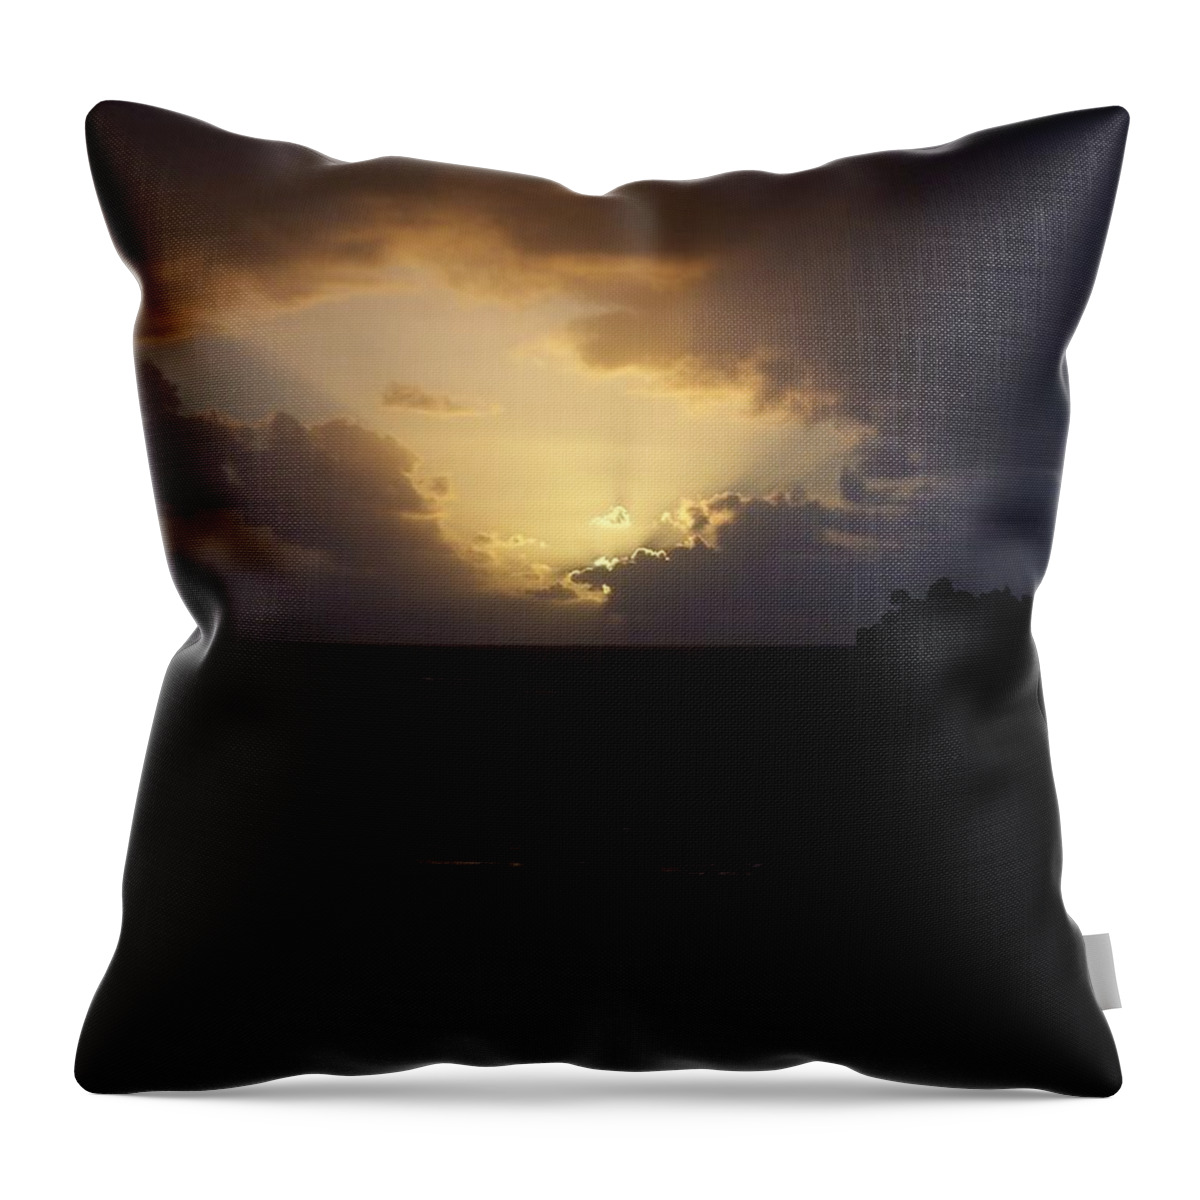 Sunrise Throw Pillow featuring the photograph Hawaiian Sunrise by Michelle Miron-Rebbe